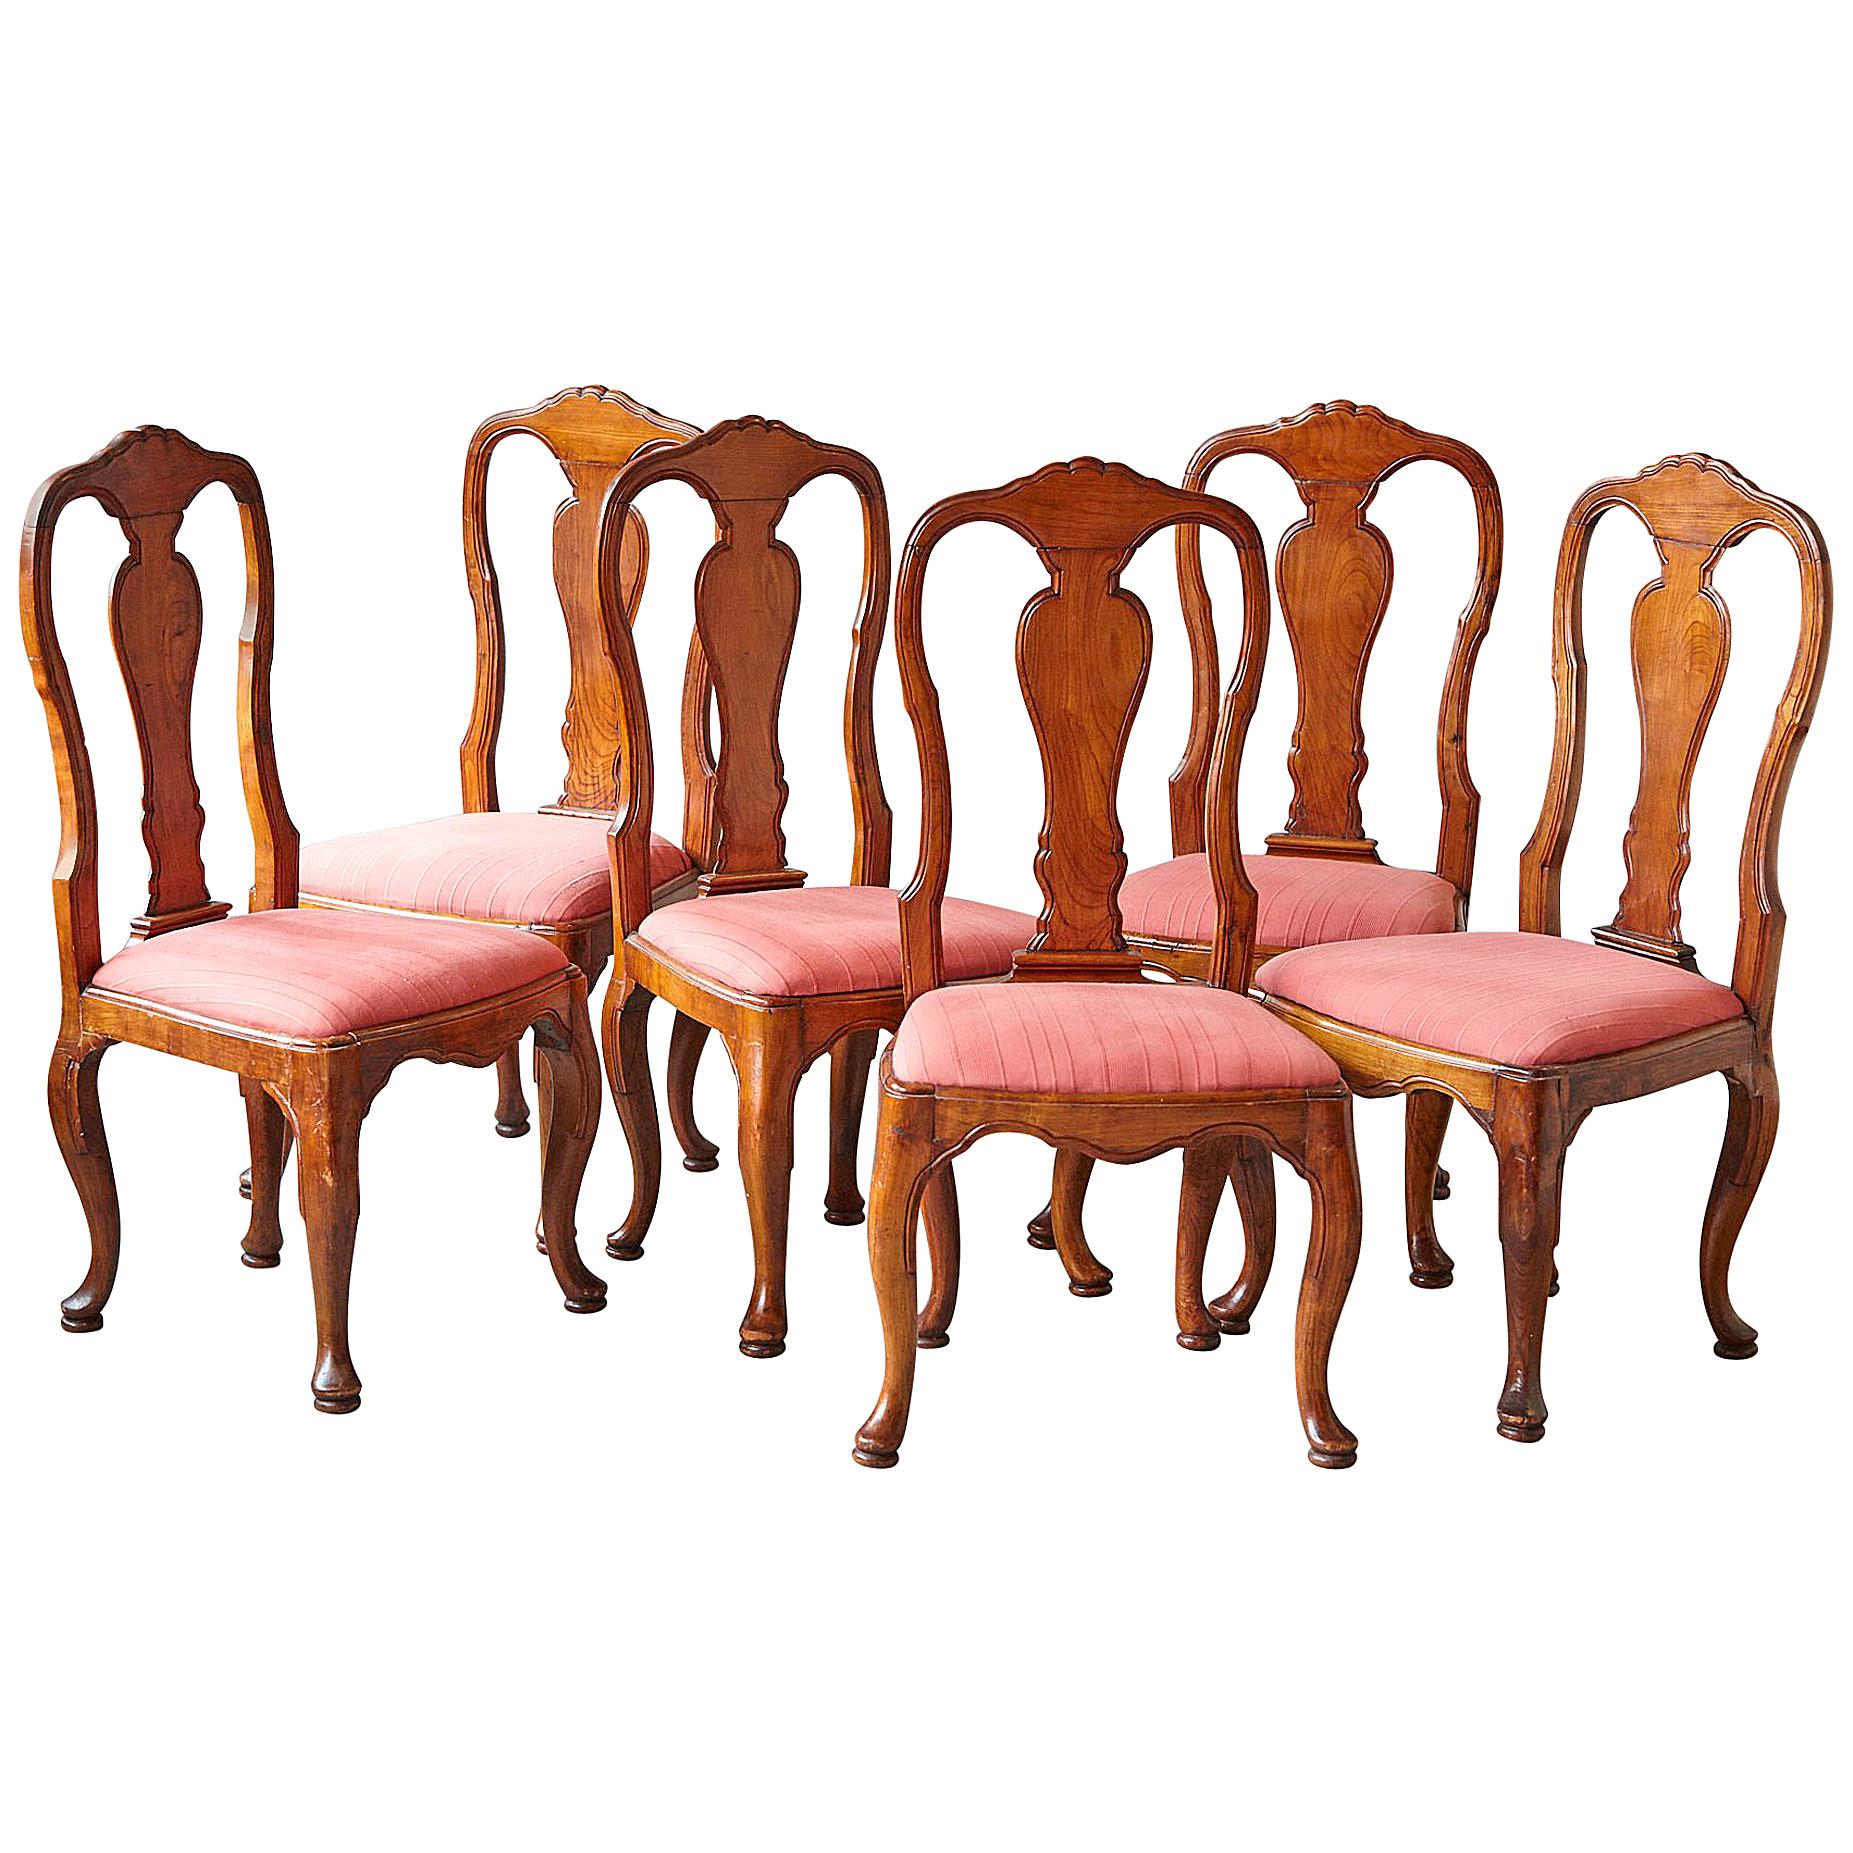 19th Century Set of Six Louis XIV French Country Style Carved Walnut Chairs